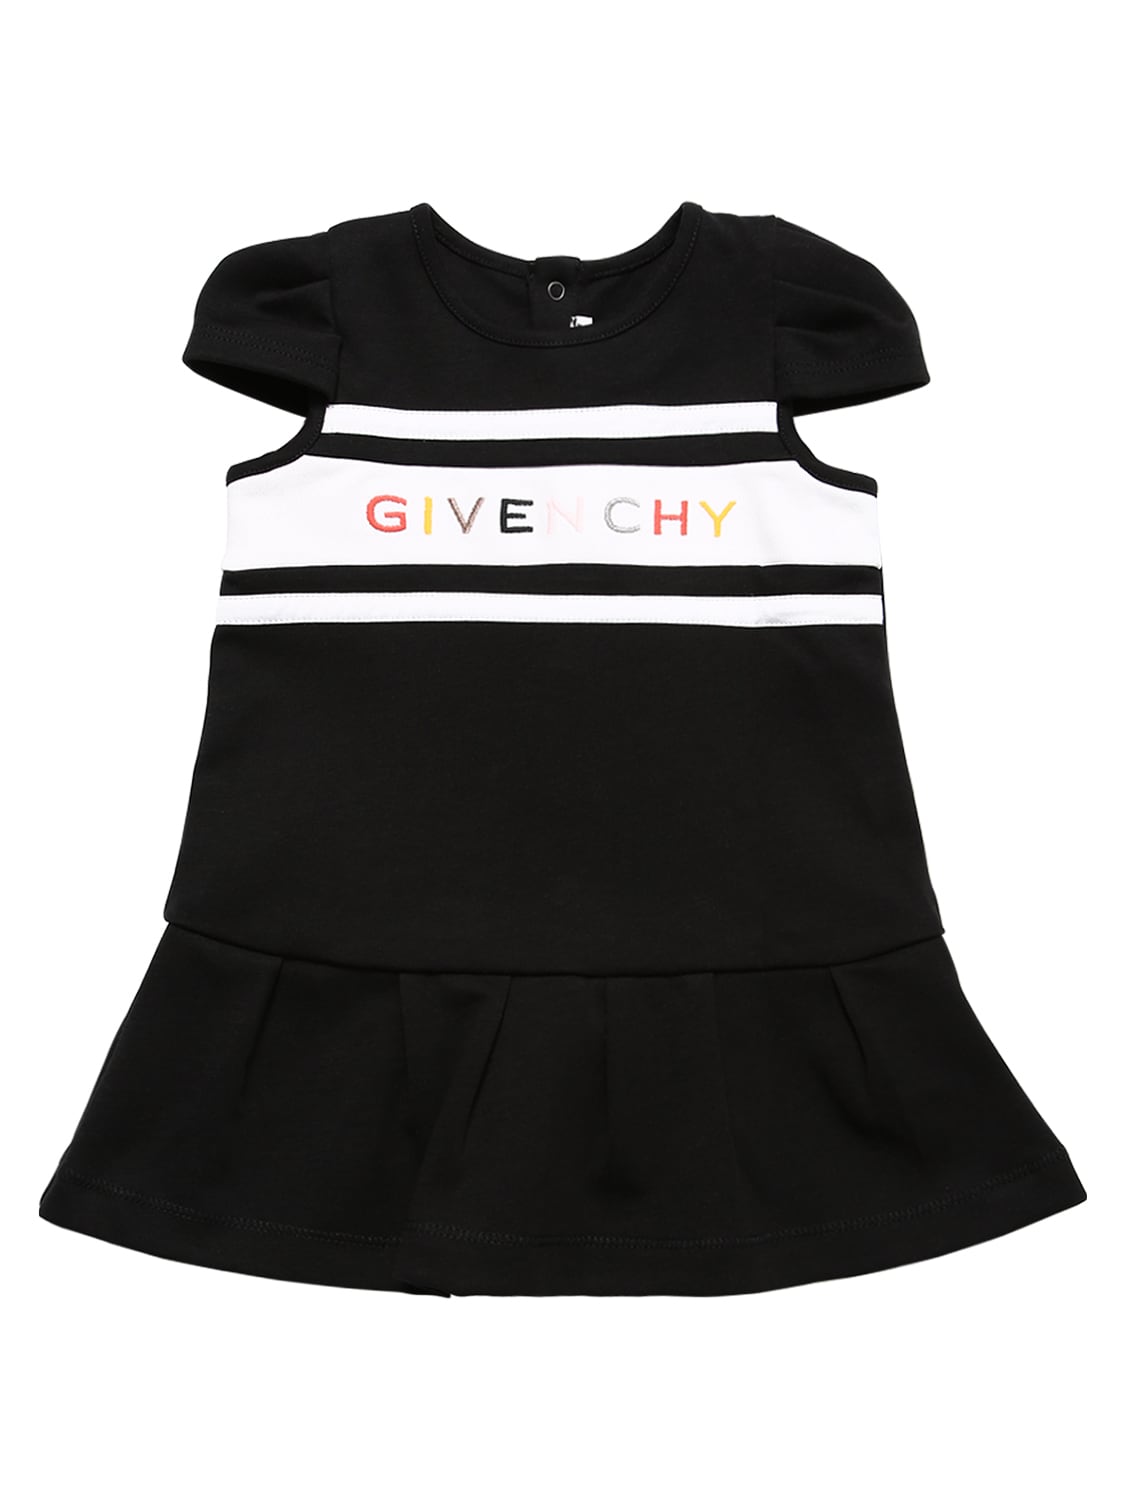 GIVENCHY LOGO EMBROIDERED COTTON SWEATER DRESS,71IOFM015-MDLC0